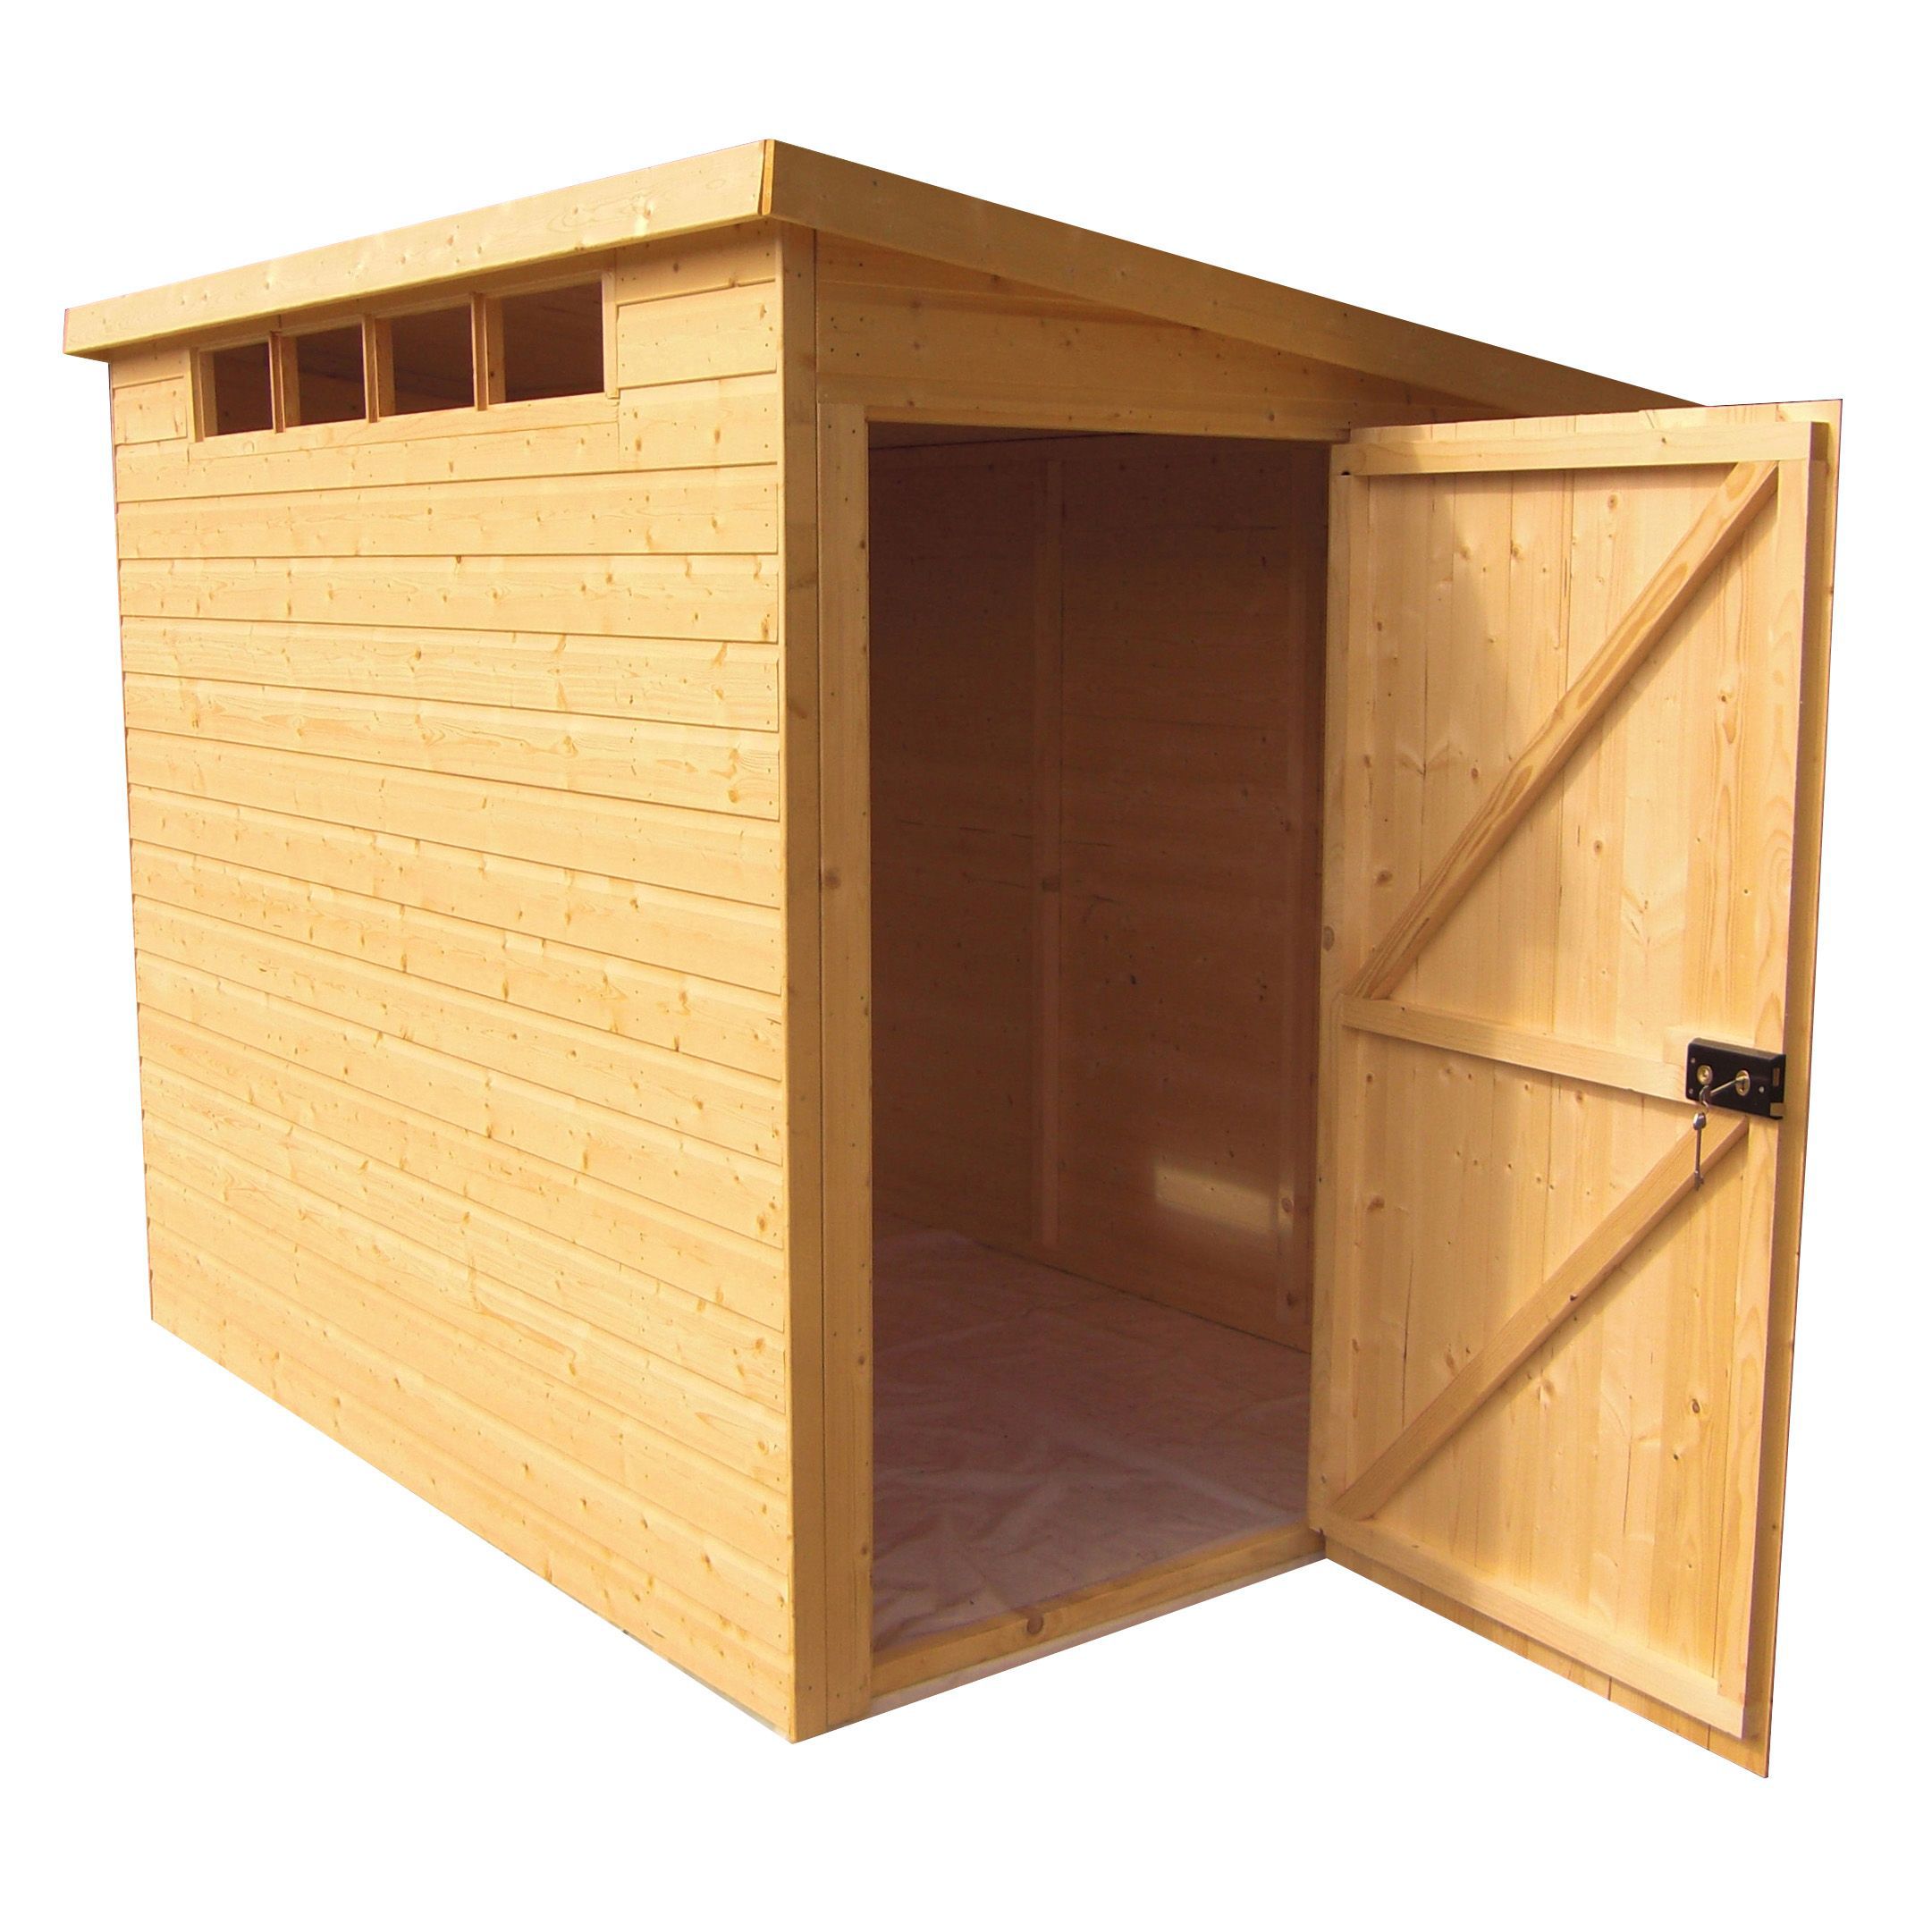 Shire 10x10 Pent Shed - Base not includedAssembly service included